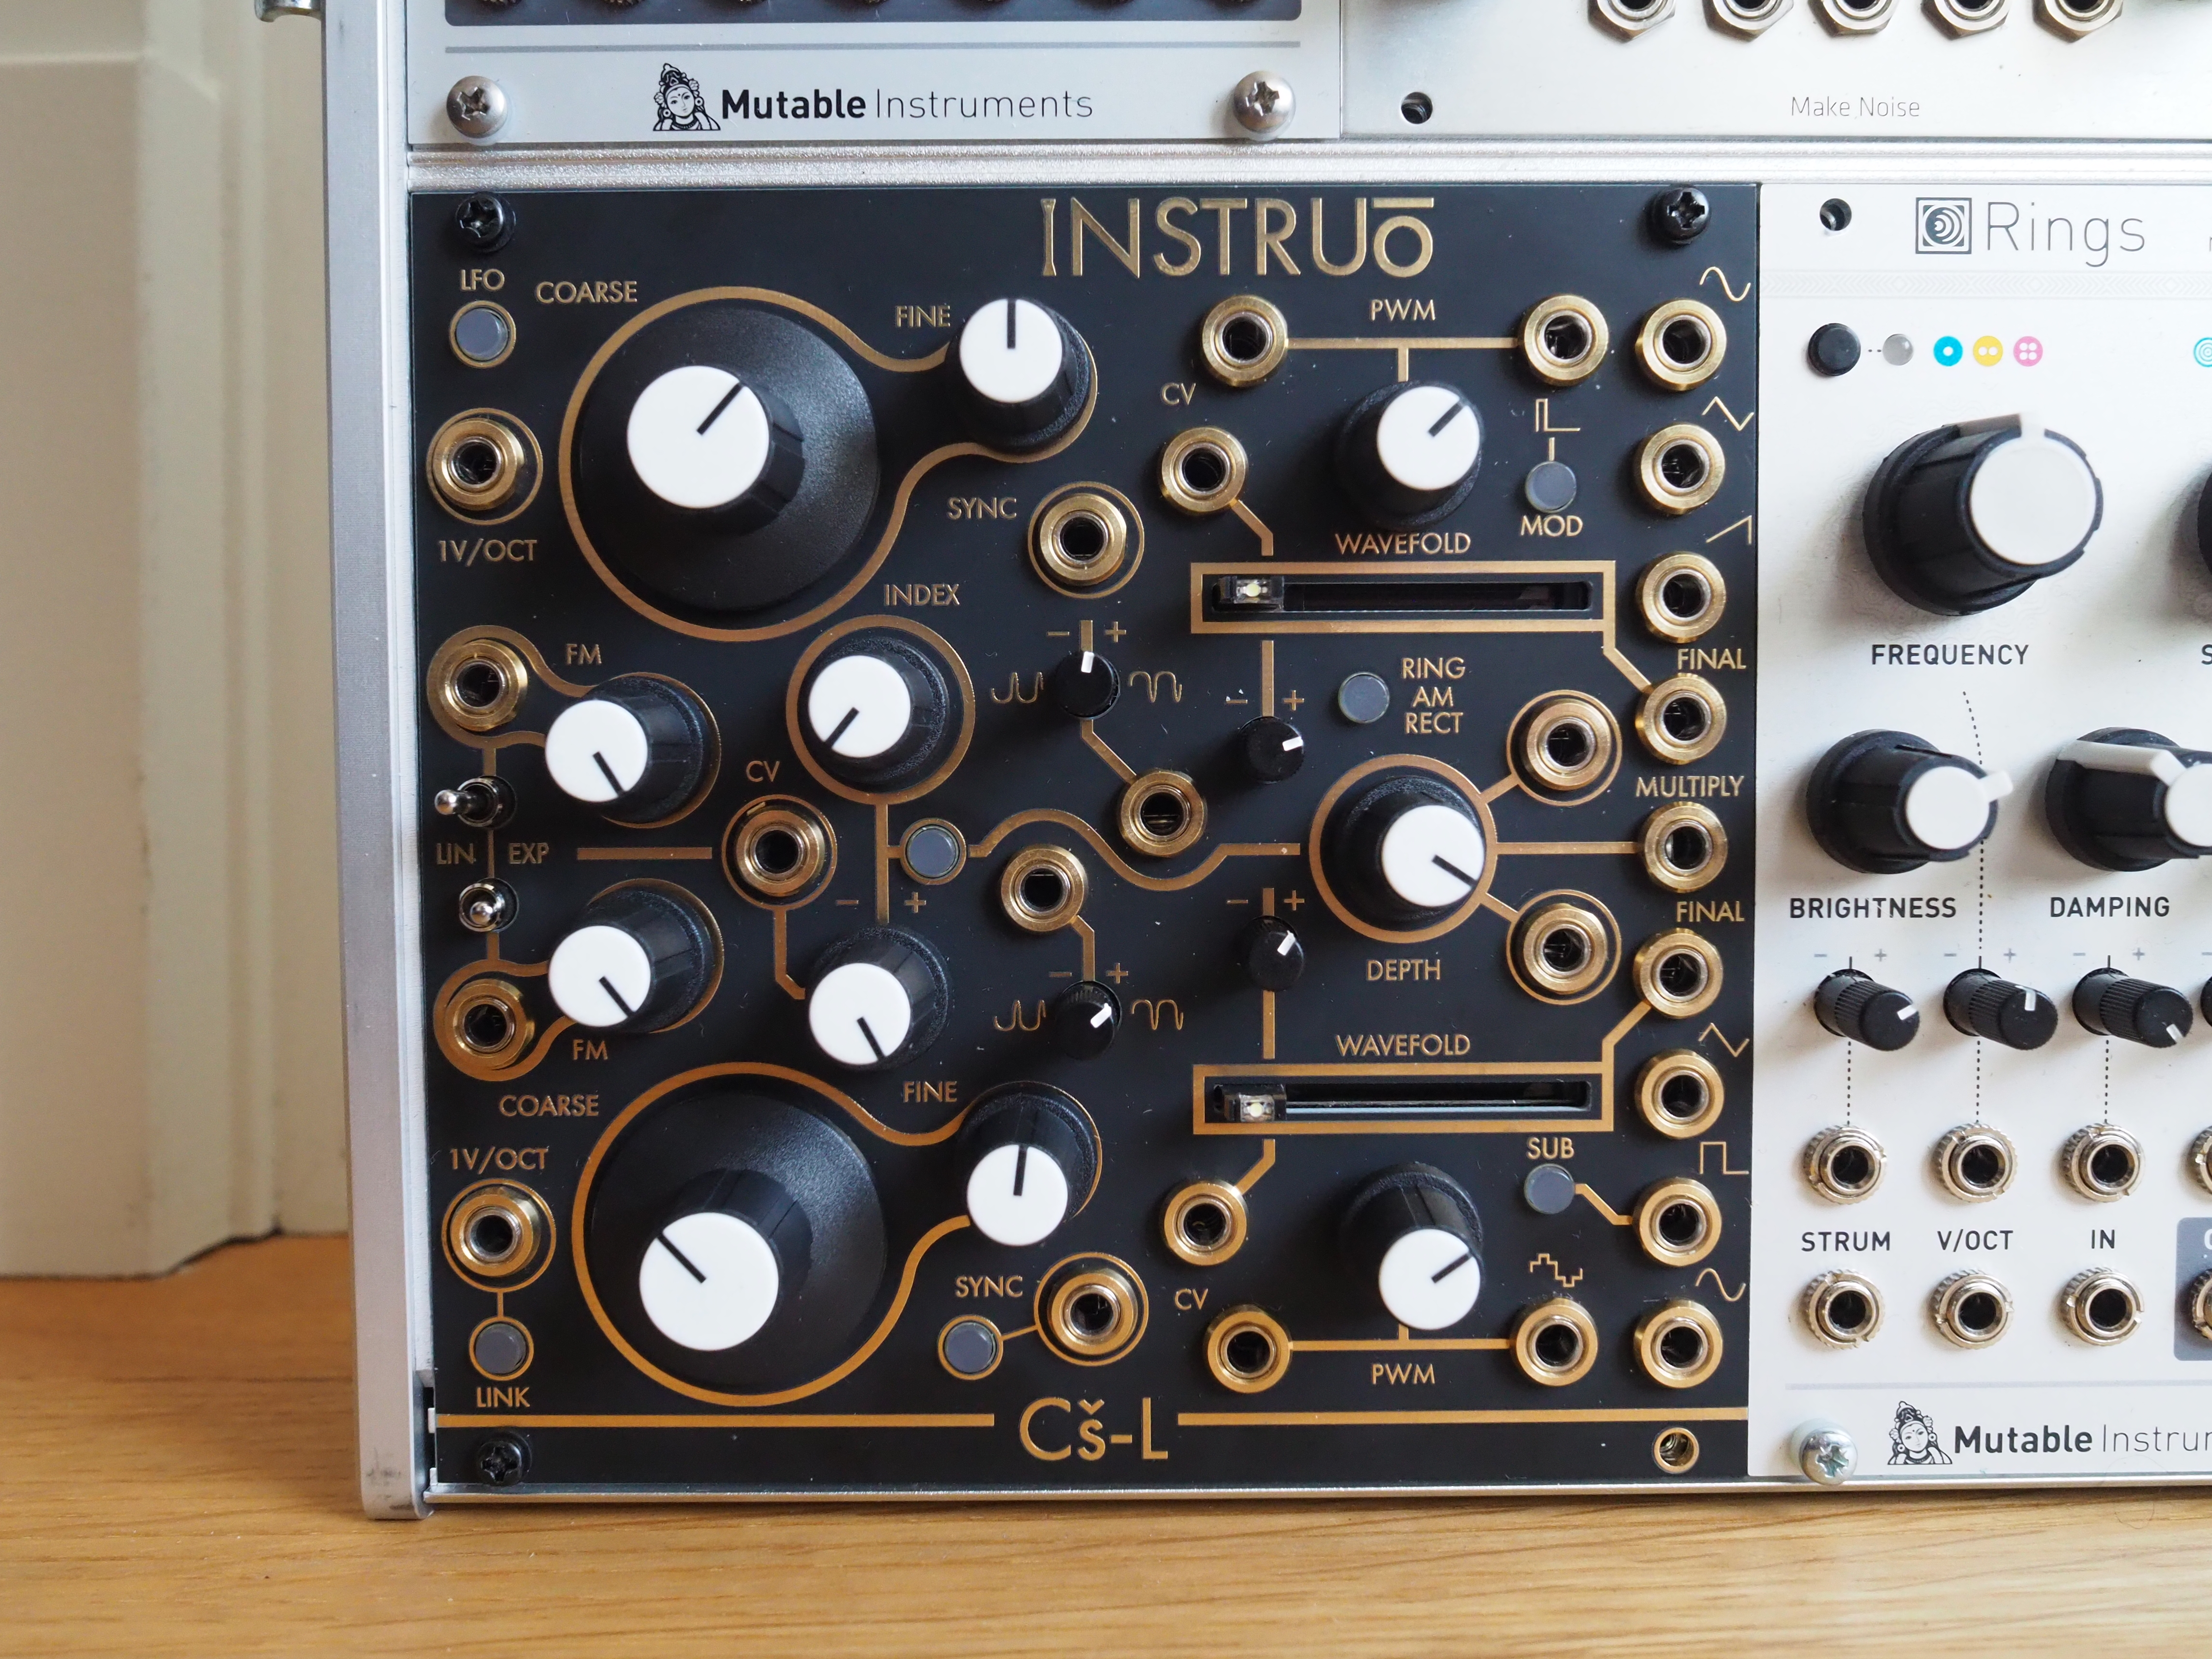 Review: Instruo Cš-L Dual Voltage Controlled Oscillator – SUBLIME